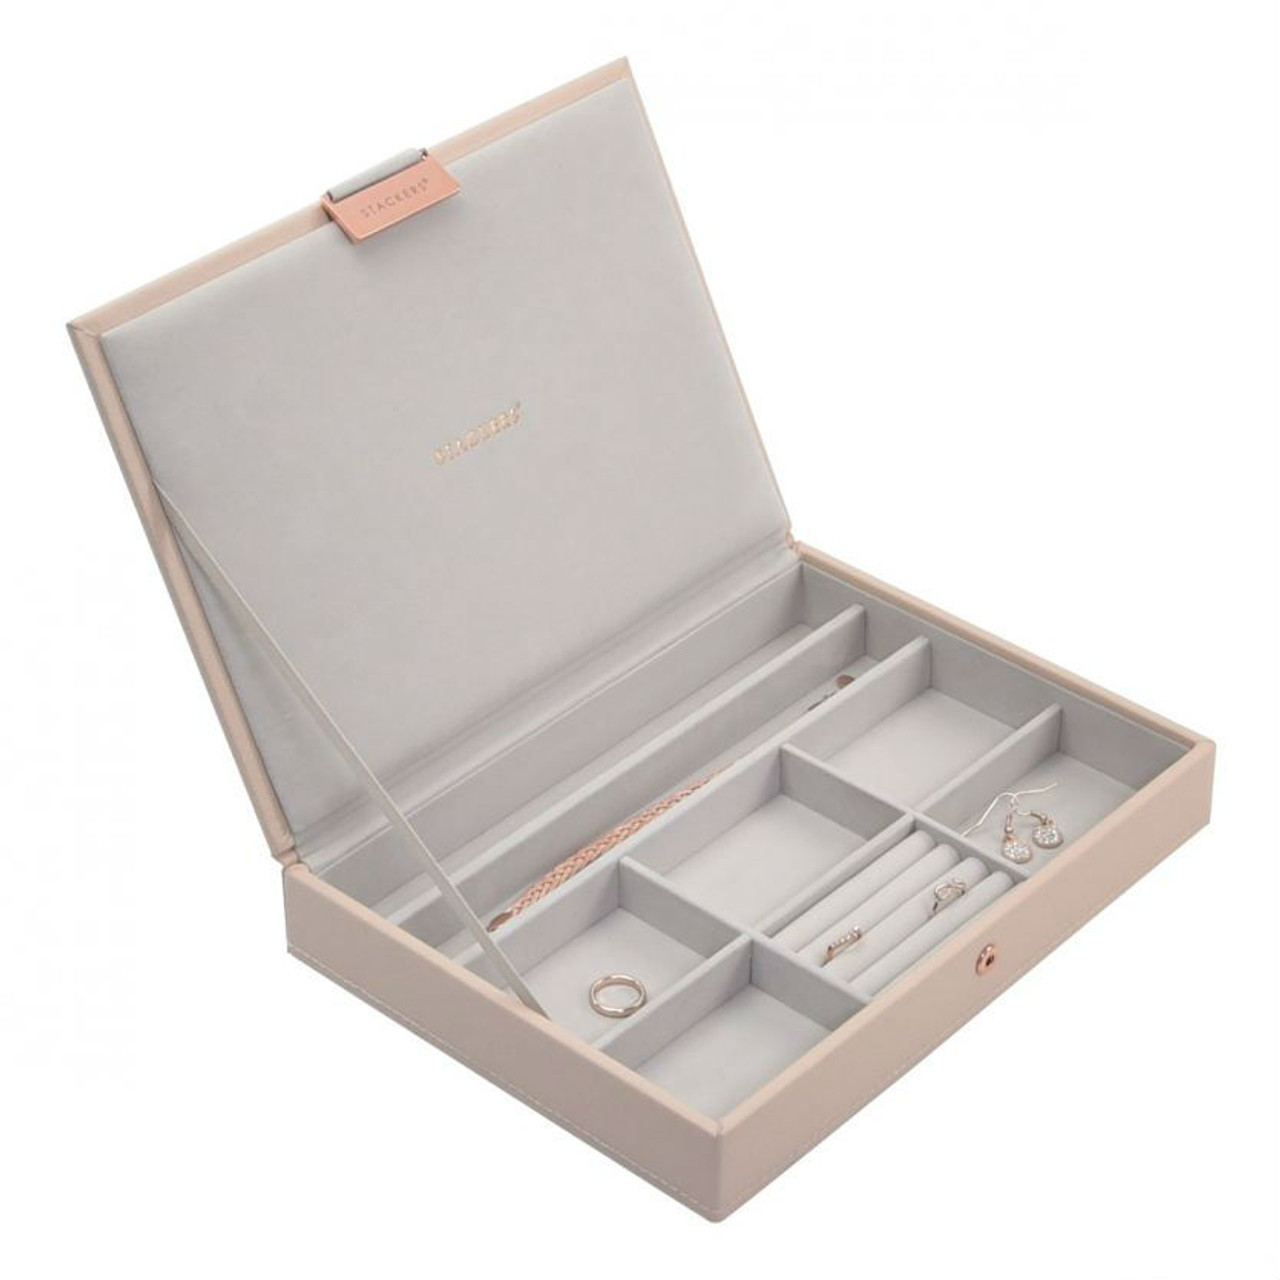 Stackers Classic Jewellery Box with Lid - Blush